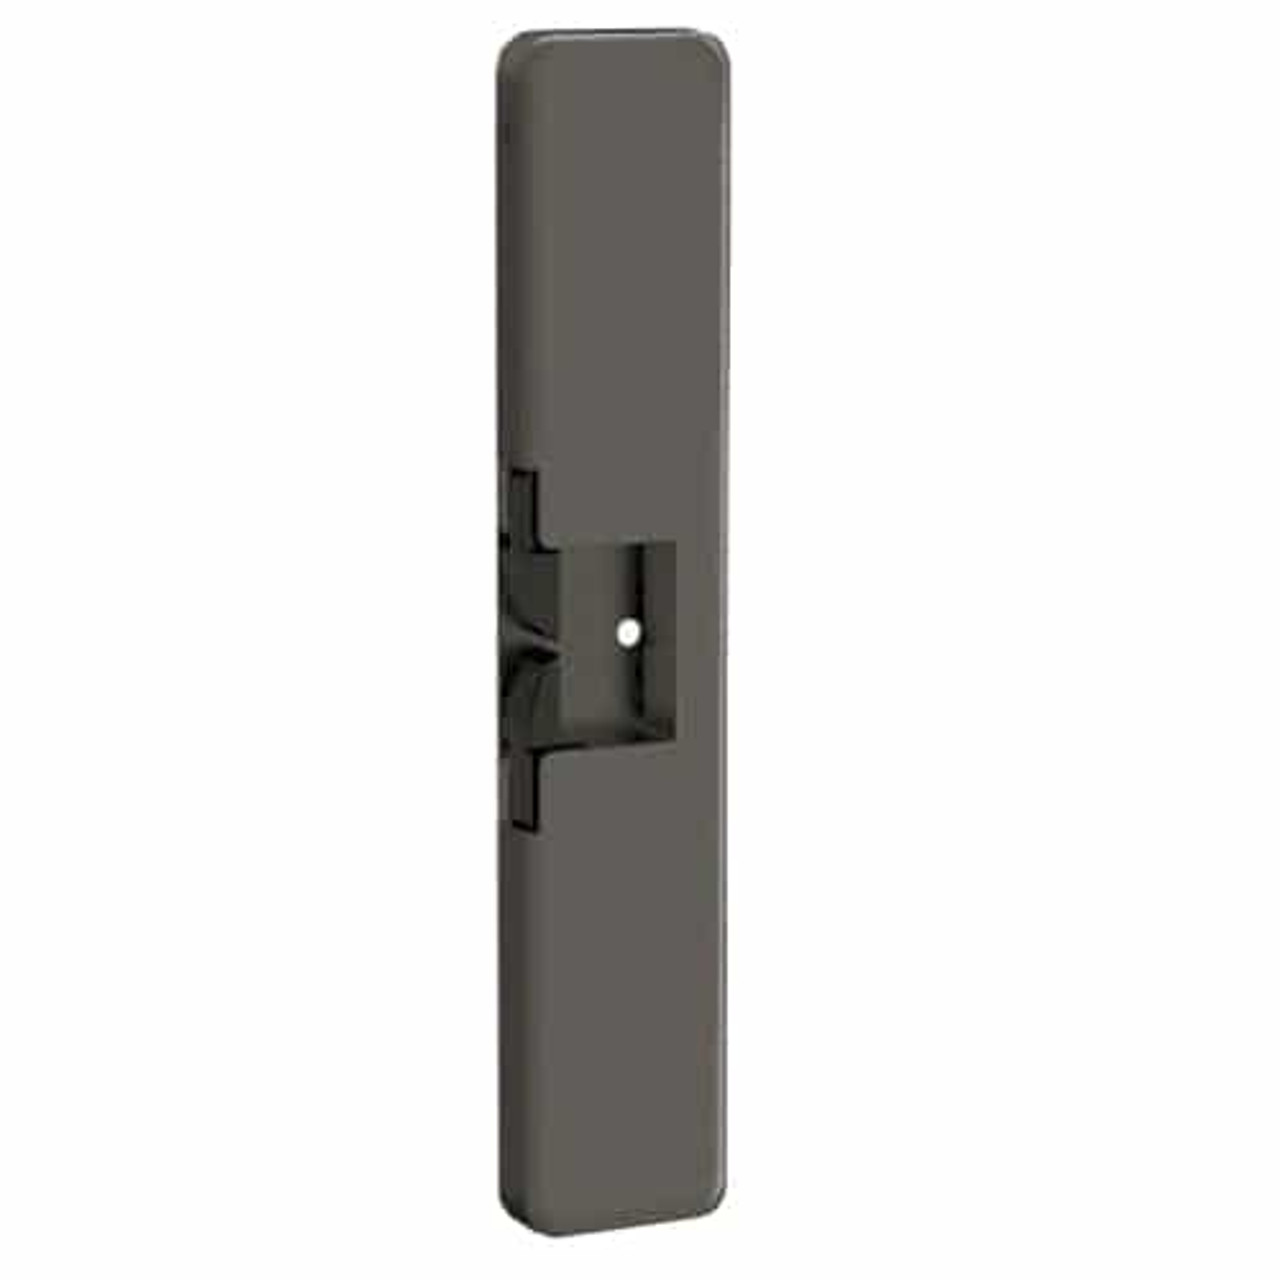 9400-613-LBSM Hes Electric Strike Slim-Line with LatchBolt Strike Monitor in Bronze Toned finish